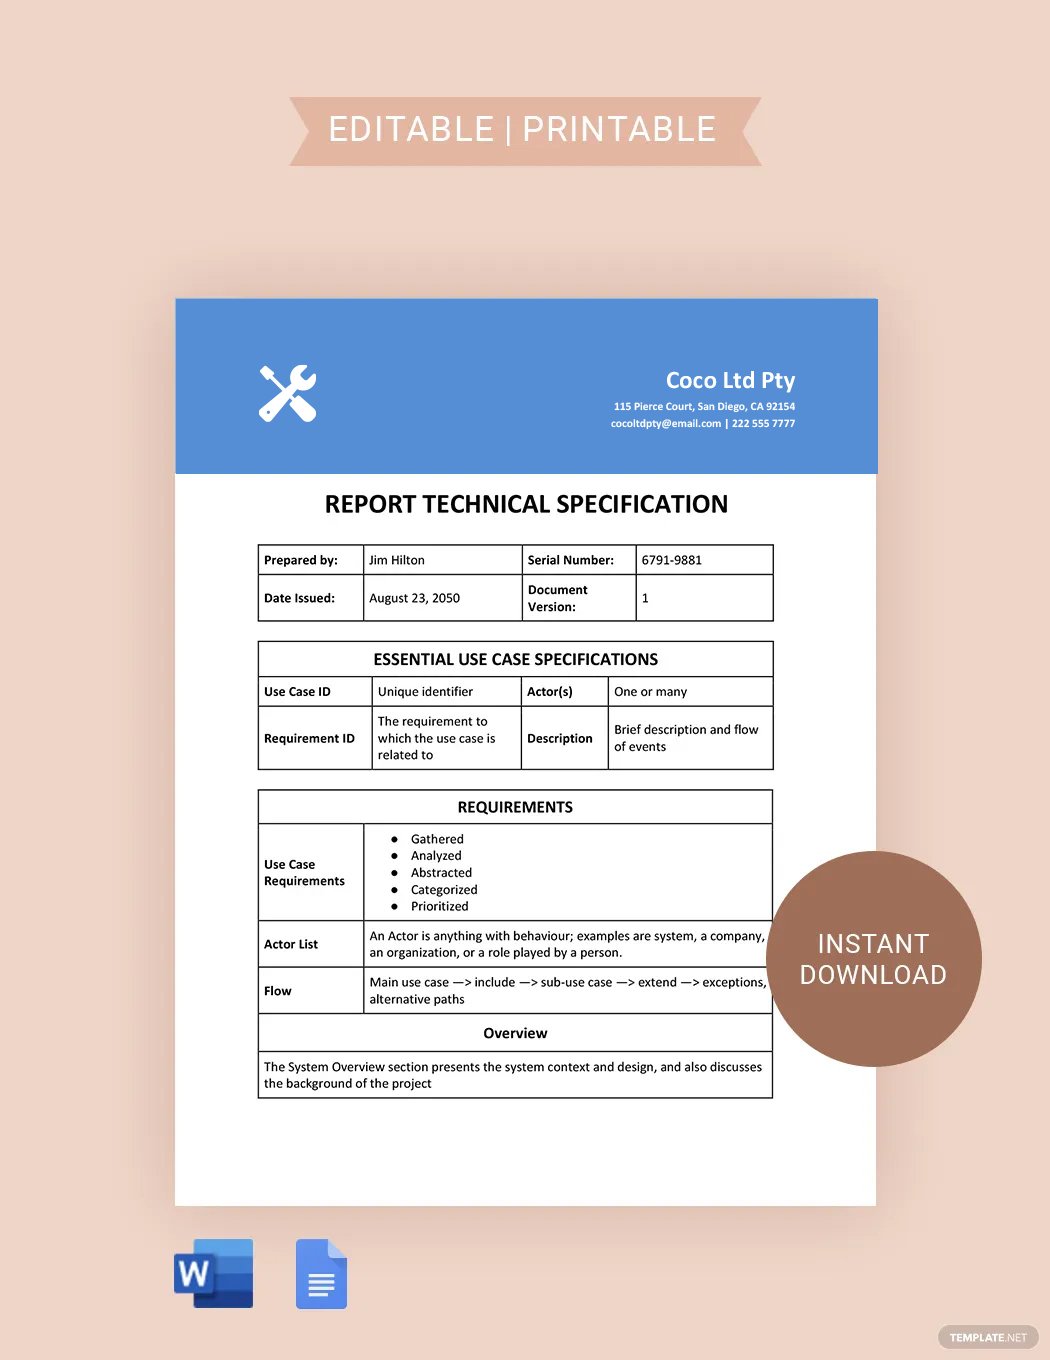 Report Technical Specification Template in Word, Google Docs